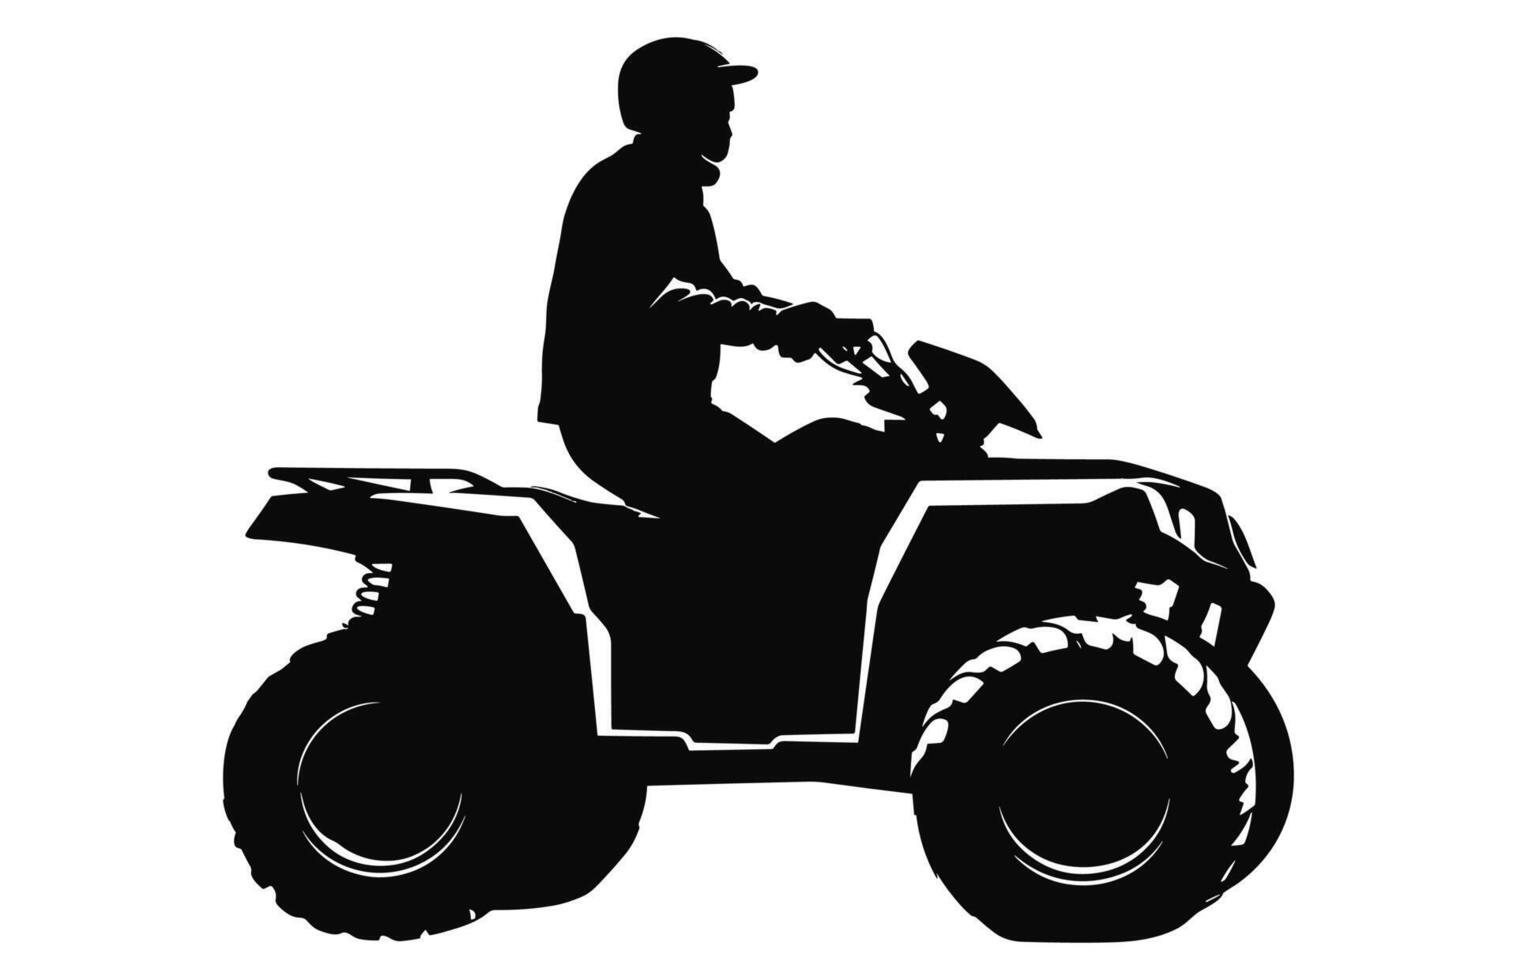 Pilot riding Atv black silhouette isolated on a white background, A Man Riding atv black vector